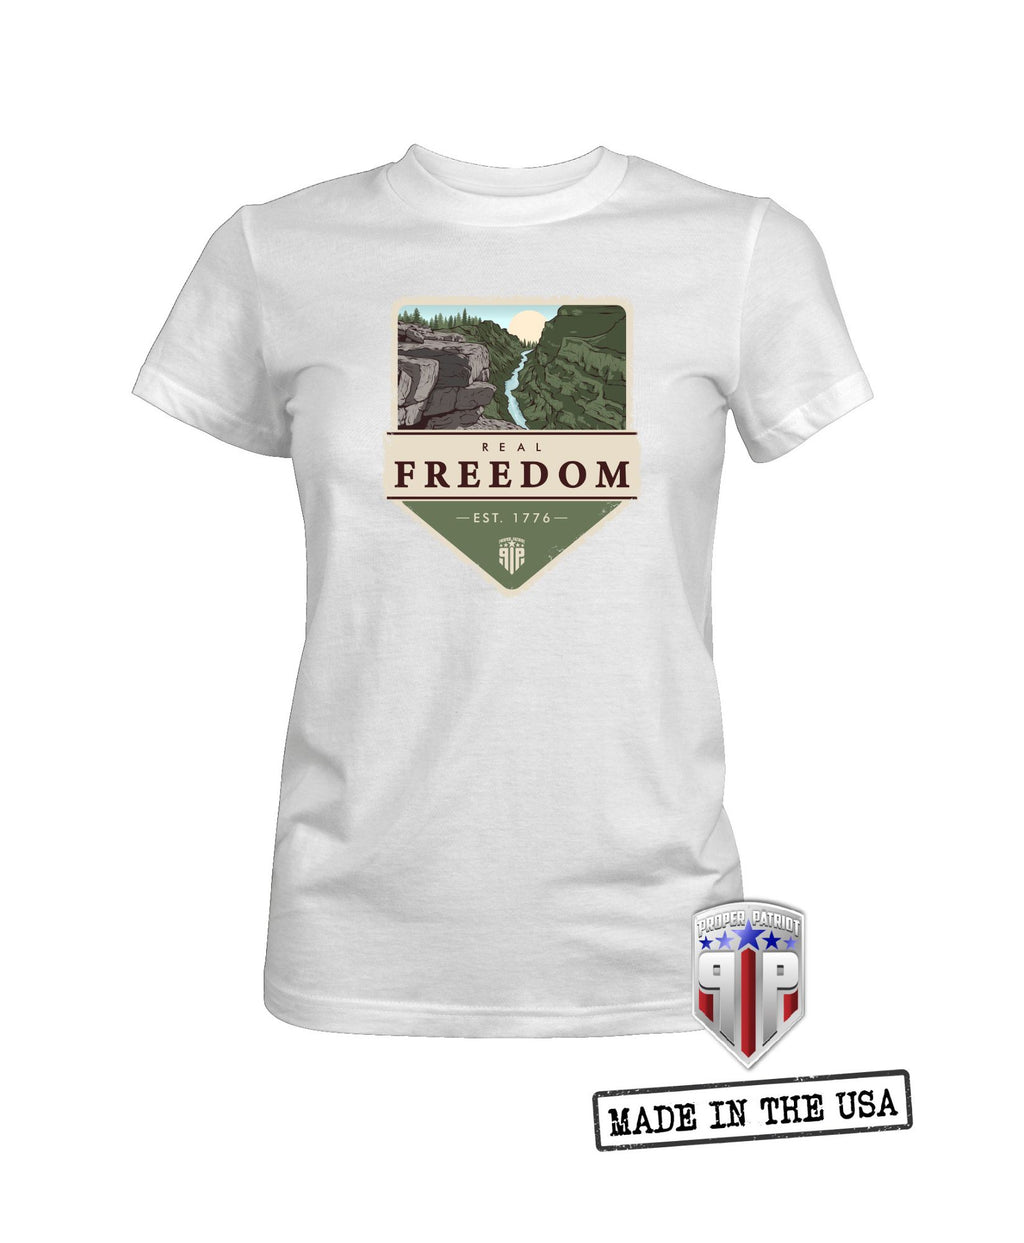 Real Freedom- American Outdoor Apparel - USA Shirt - Women's Patriotic Shirts